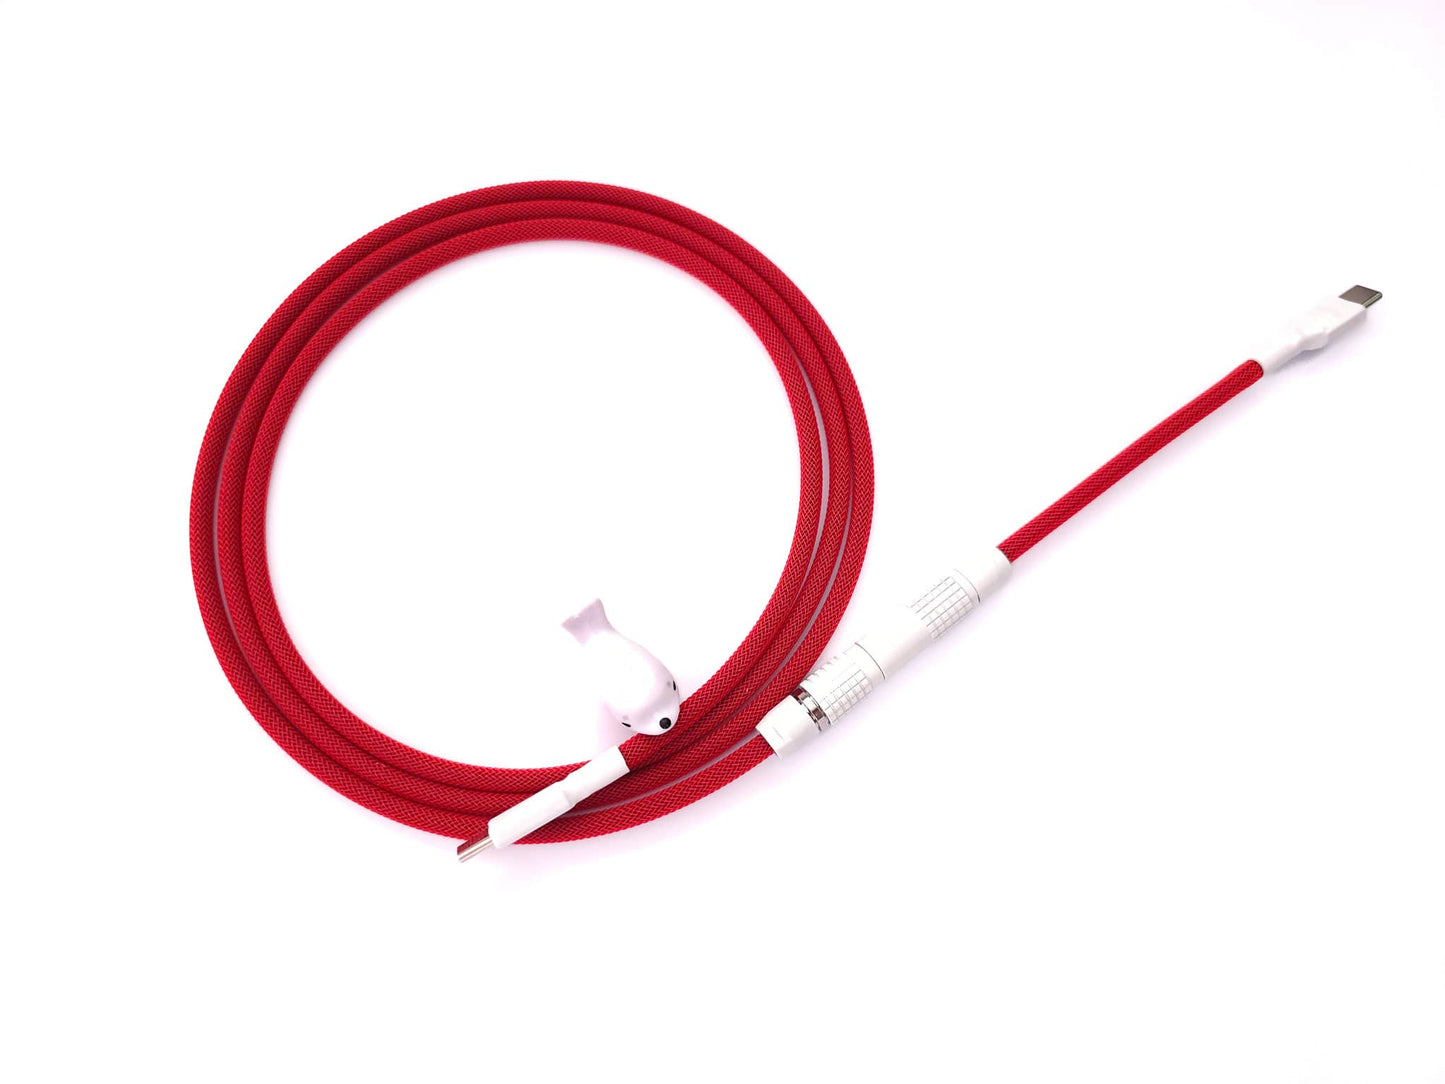 Red cable with white Lemo